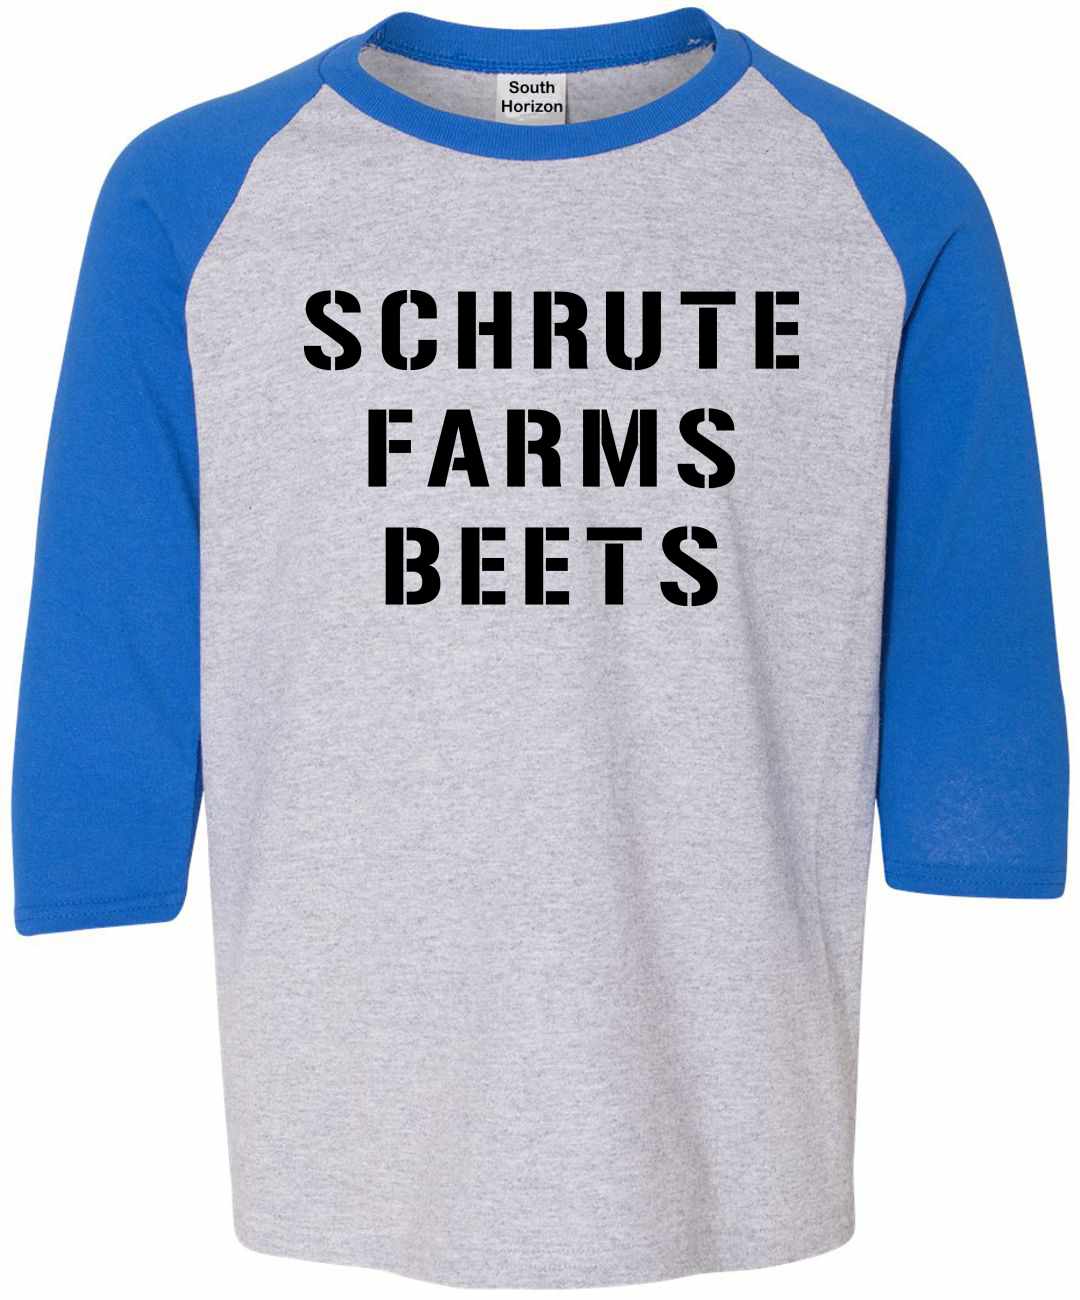 SCHRUTE FARMS BEETS on Youth Baseball Shirt (#396-212)